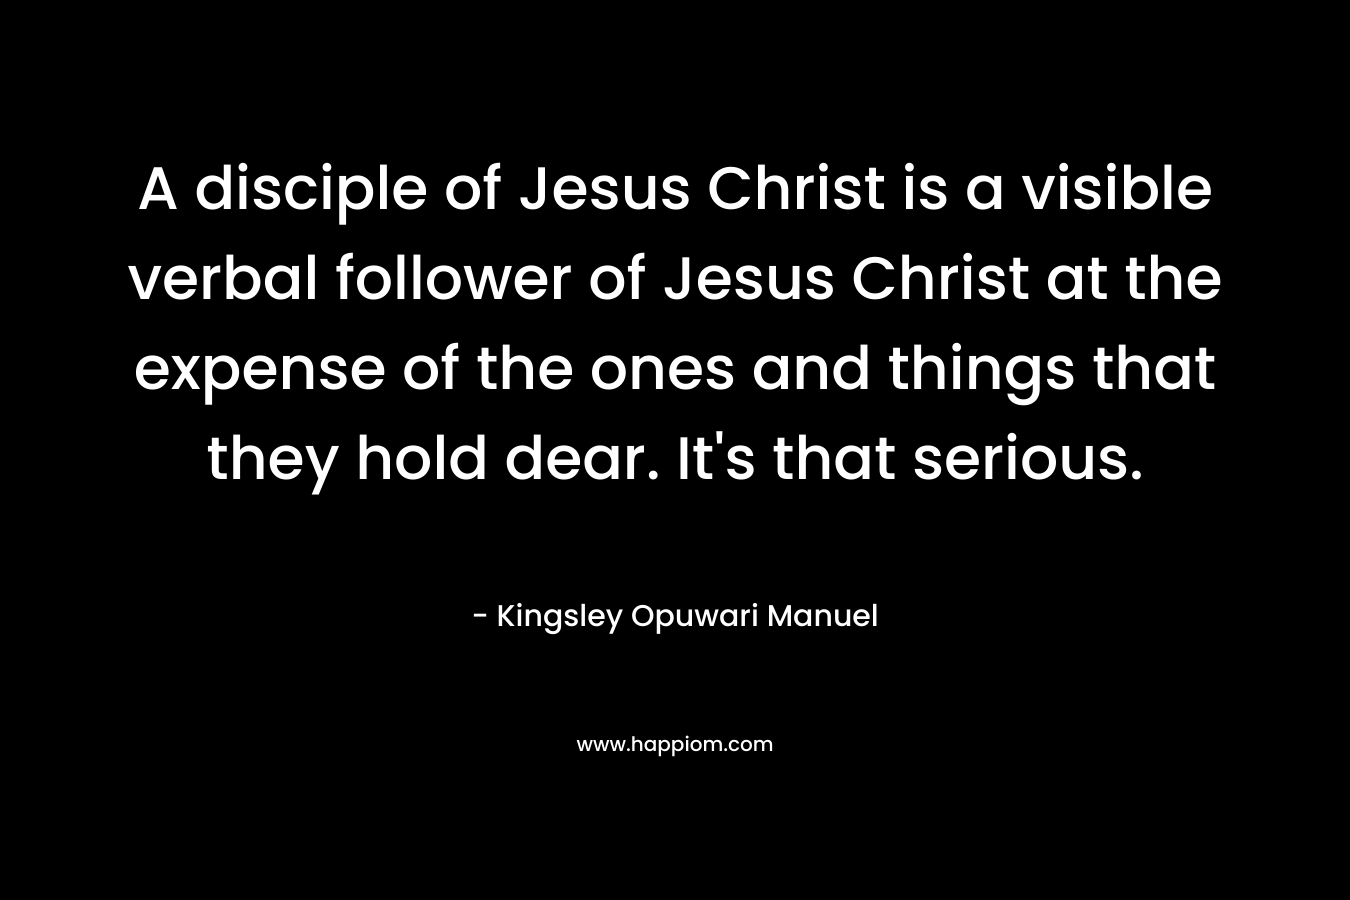 A disciple of Jesus Christ is a visible verbal follower of Jesus Christ at the expense of the ones and things that they hold dear. It's that serious.